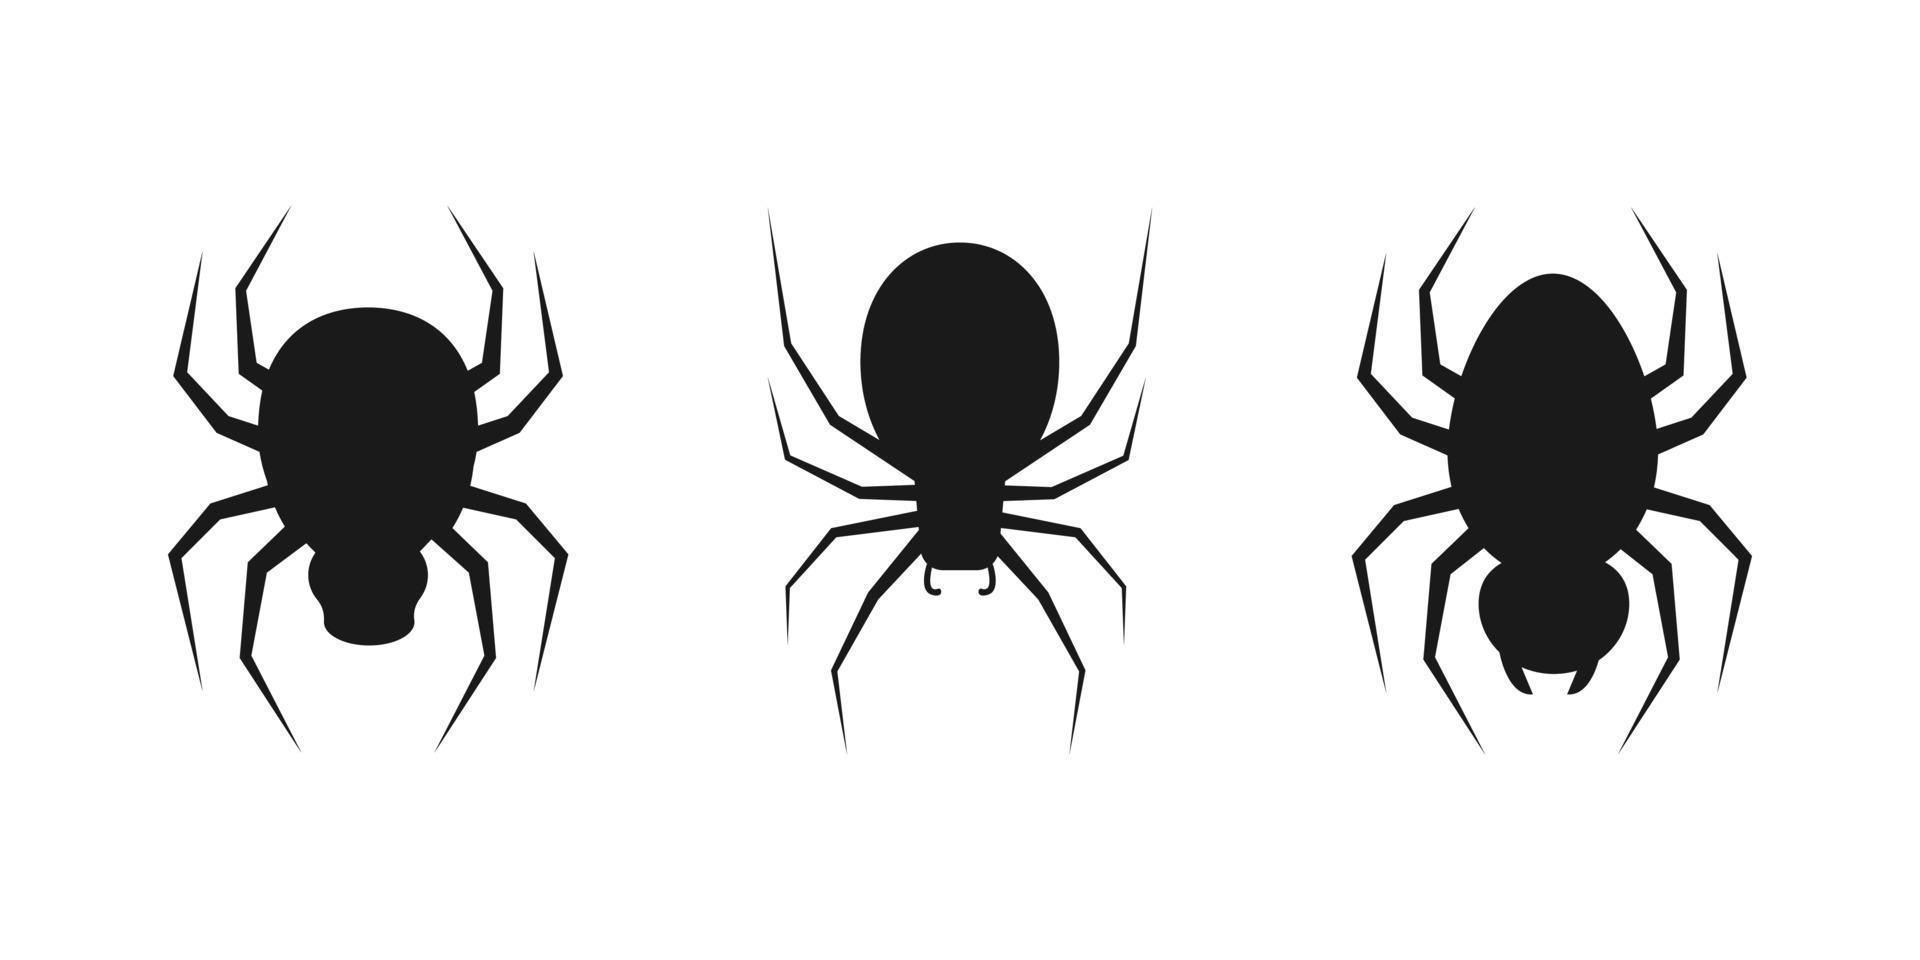 Spiders black silhouette set of illustrations vector